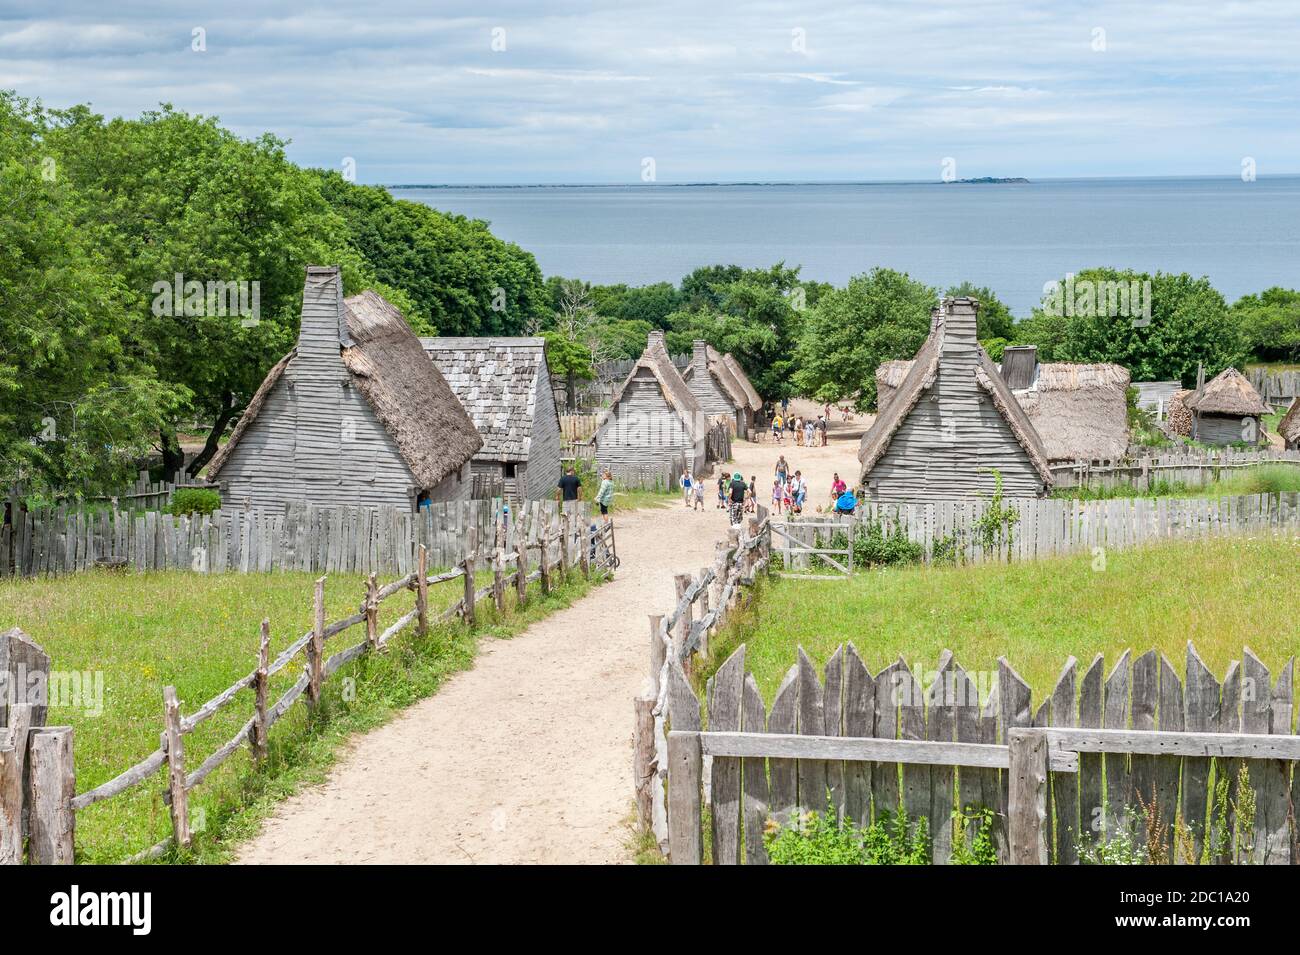 Plimoth Plantation in Plymouth. This open-air museum replicates the original settlement at Plymouth Colony where the first Thanksgiving was held. Stock Photo